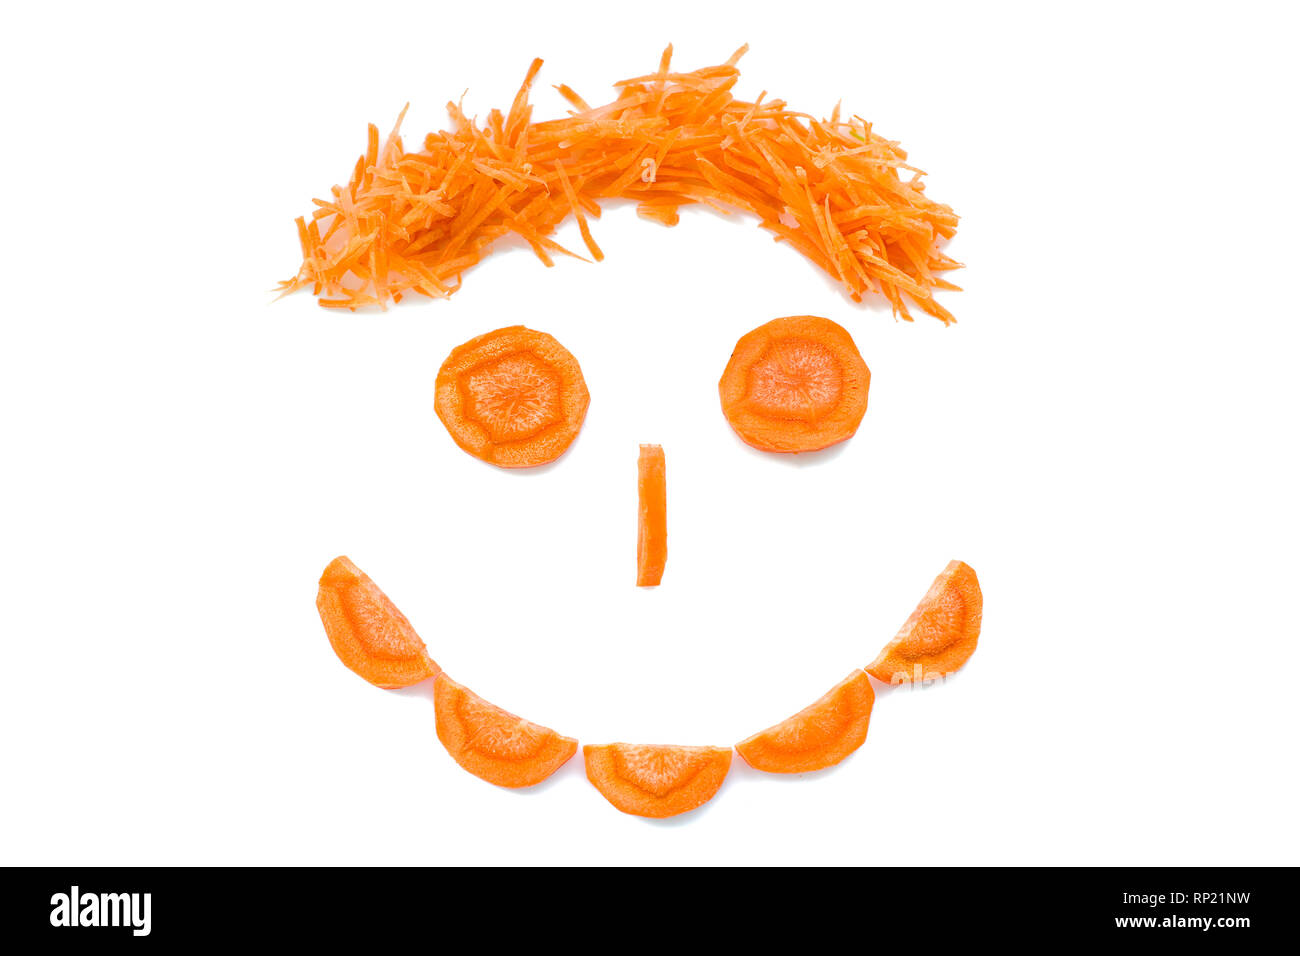 dietary food is a good mood. smiles funny face made of carrots with a hairdo. white background. isolate Stock Photo